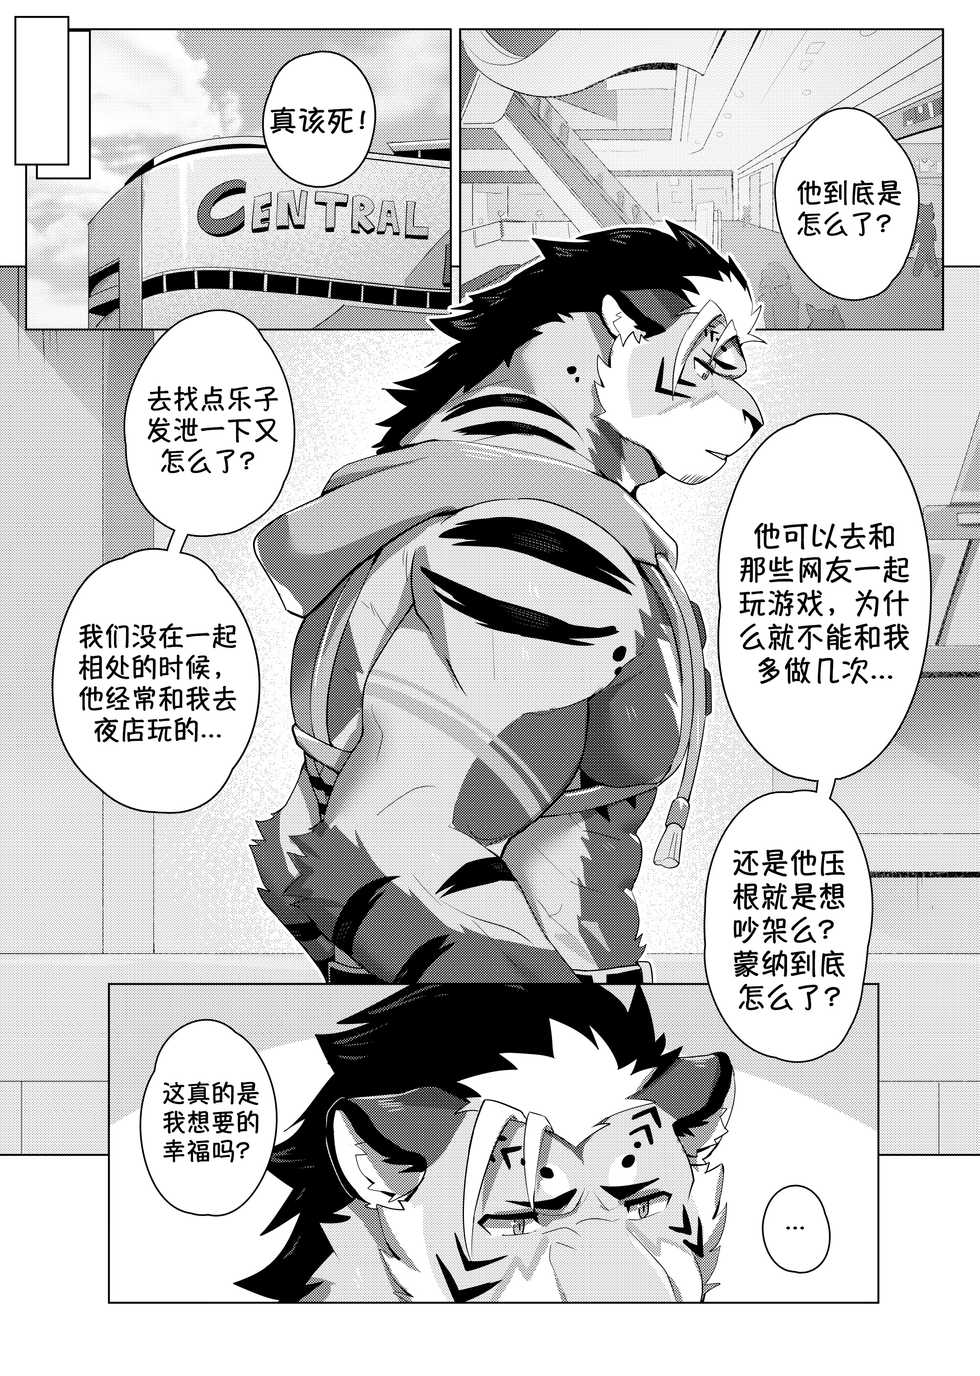 [Sollyz Sundyz (Sollyz)] The Differences Between Us [Chinese ver.] 霄壤之别 - Page 8